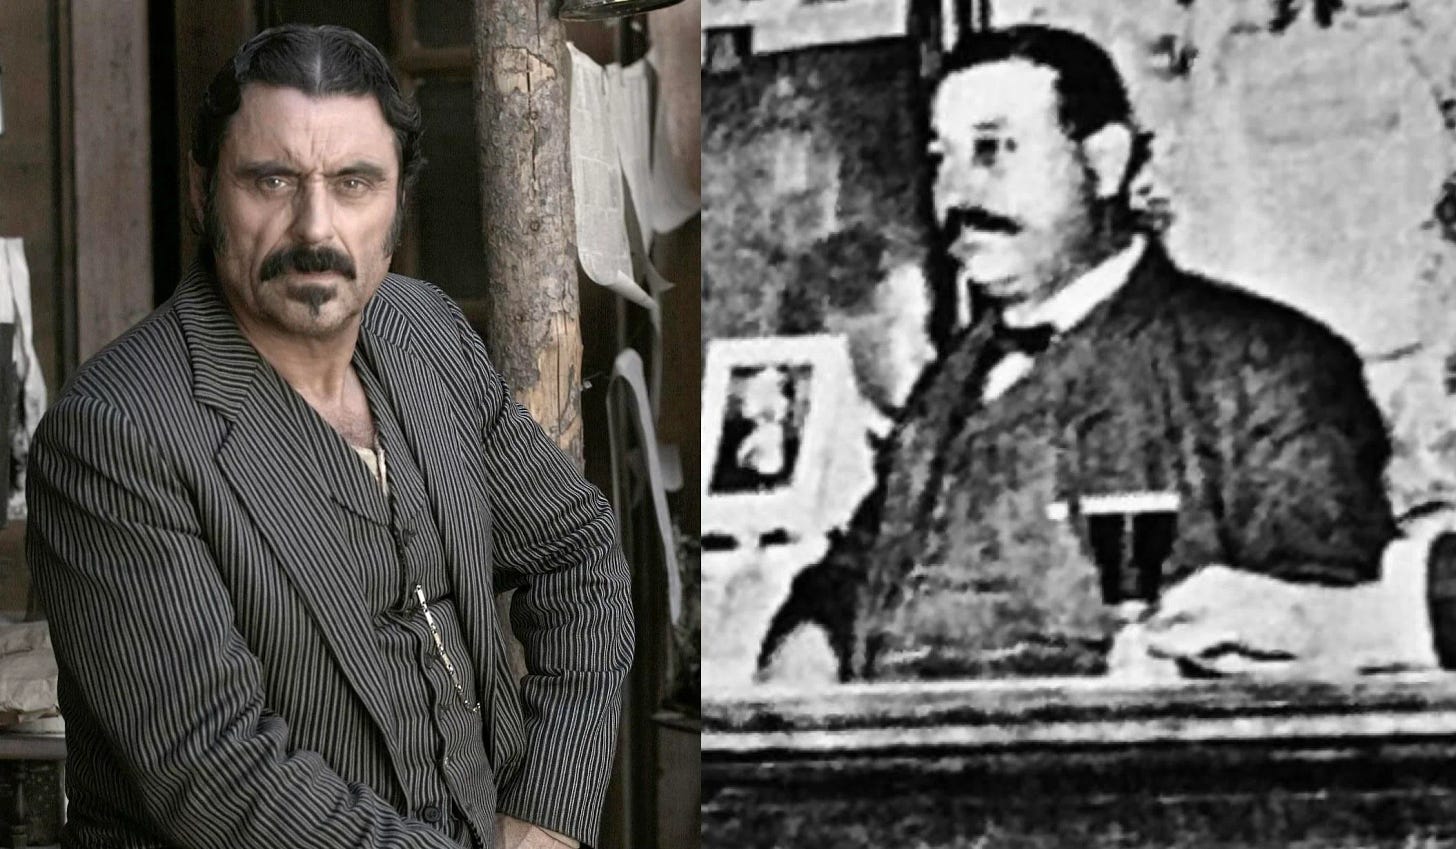 This diptych shows Deadwood's primary antagonist & antihero Al Swearengen (played by Ian McShane) on the left and a black-and-white photograph of the actual Al Swearengen (full name: Ellis Alfred Swearengen) on the right.